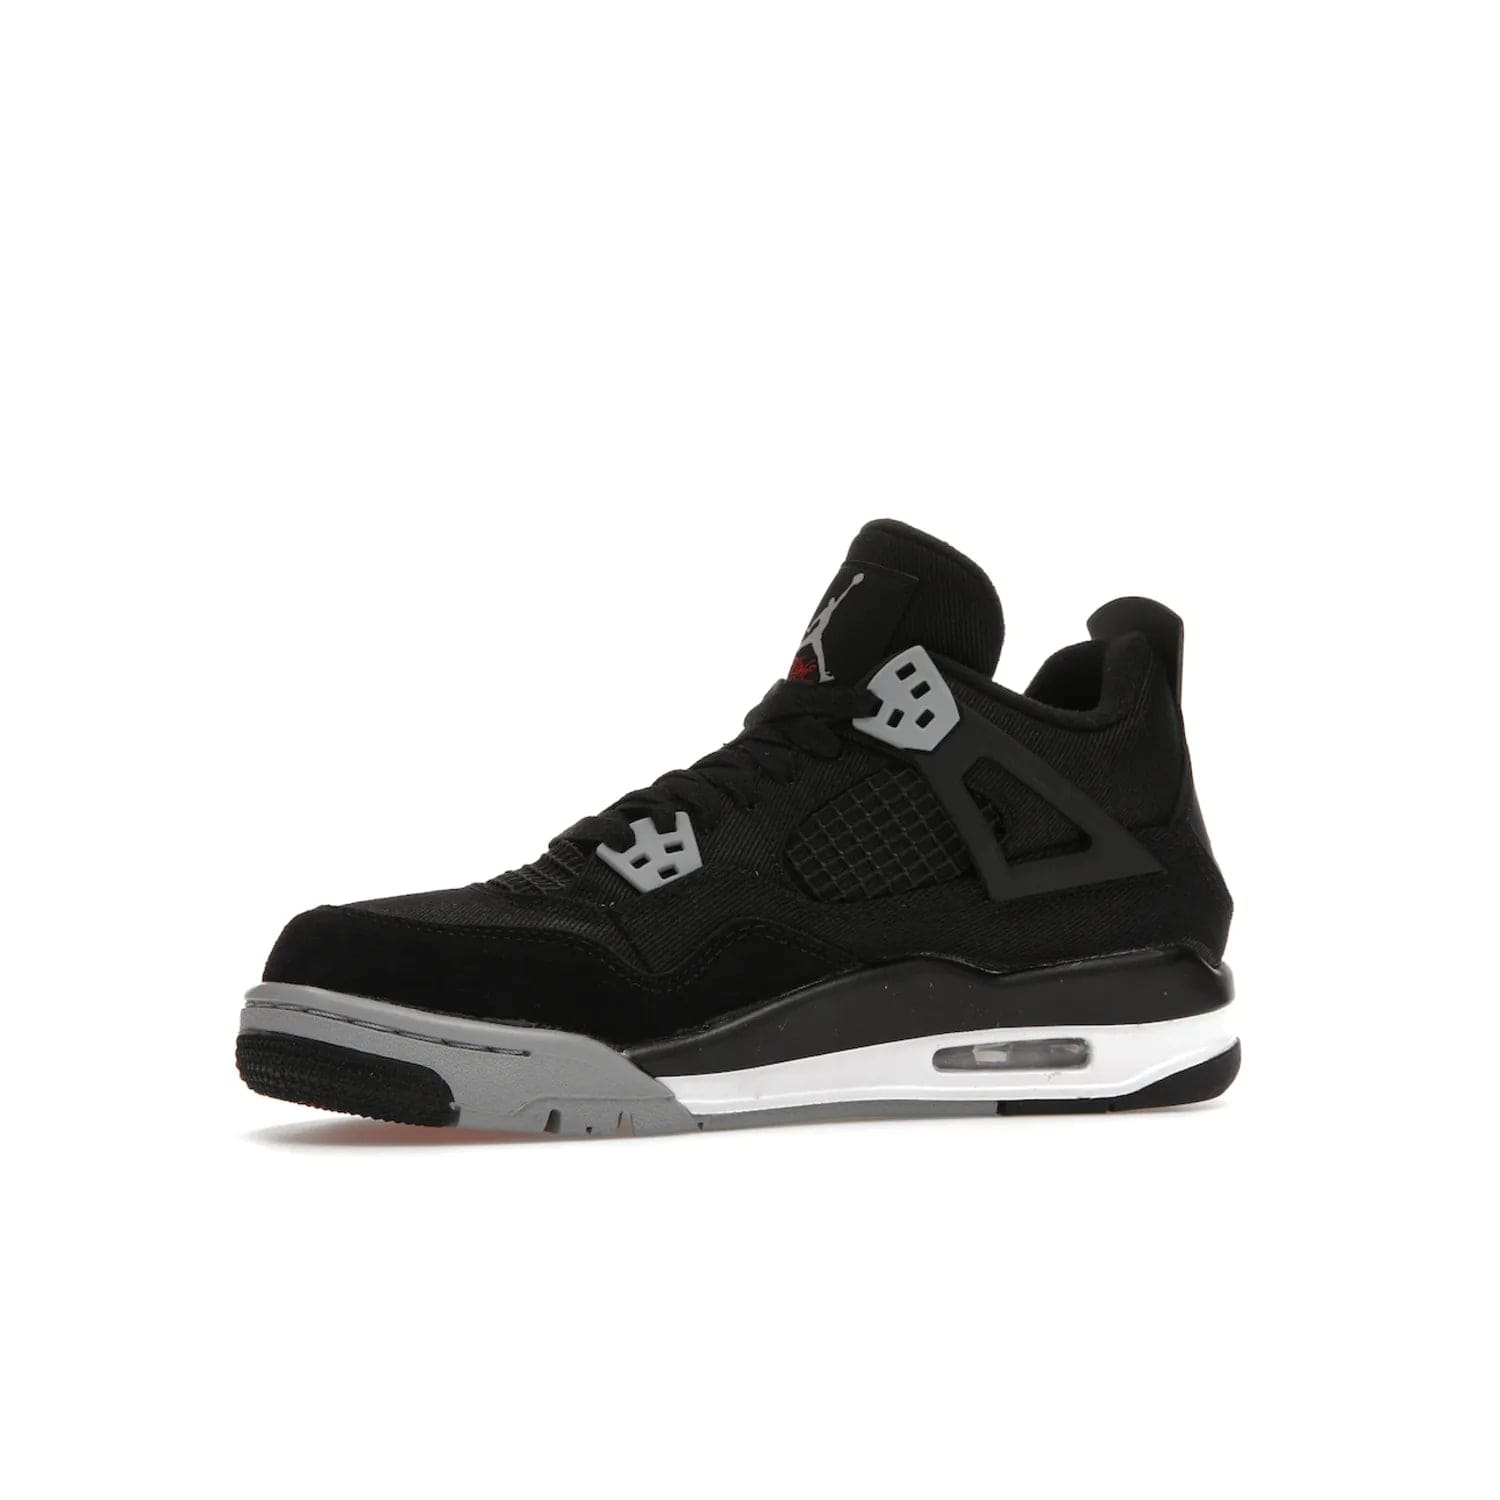 Jordan 4 Retro Black Canvas (GS) - Image 17 - Only at www.BallersClubKickz.com - Premium Air Jordan 4 Retro Black Canvas in grade-schooler's catalog. Featuring black suede canvas upper, grey molding, accents in red, white midsole, woven Jumpman tag, & visible AIR cushioning. Releasing Oct. 1, 2022.